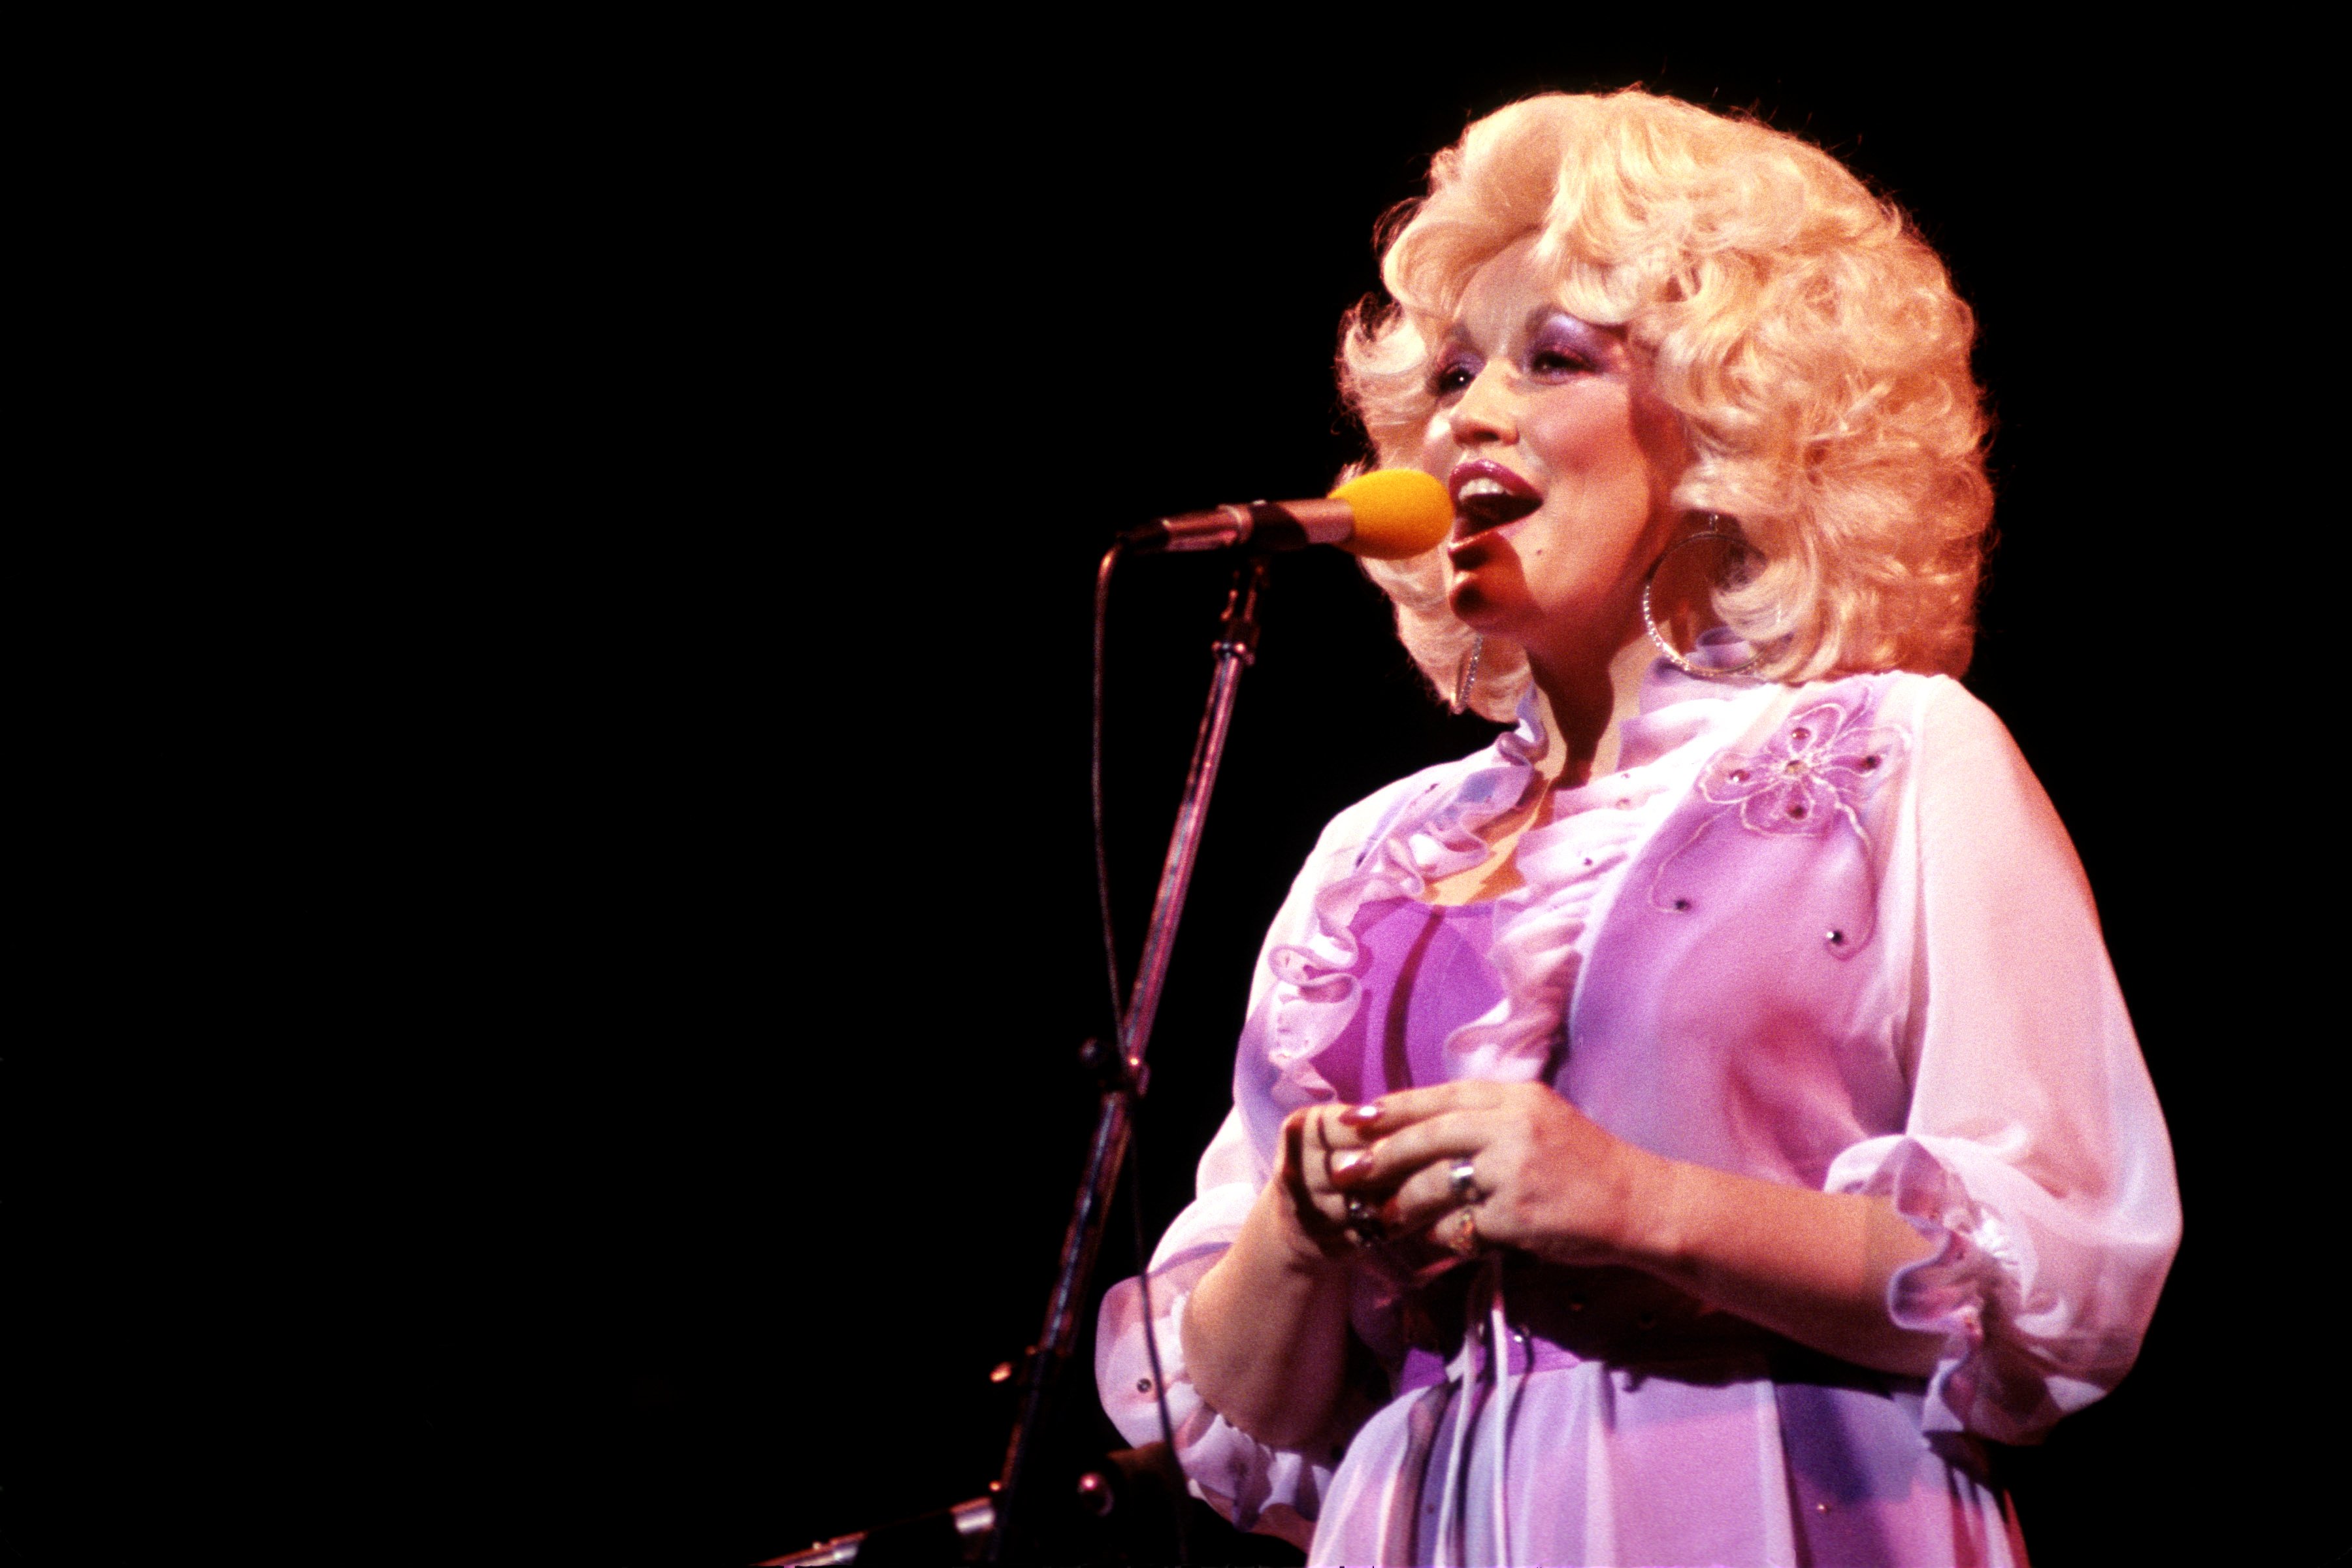 Dolly Parton performs on stage in a purple dress.